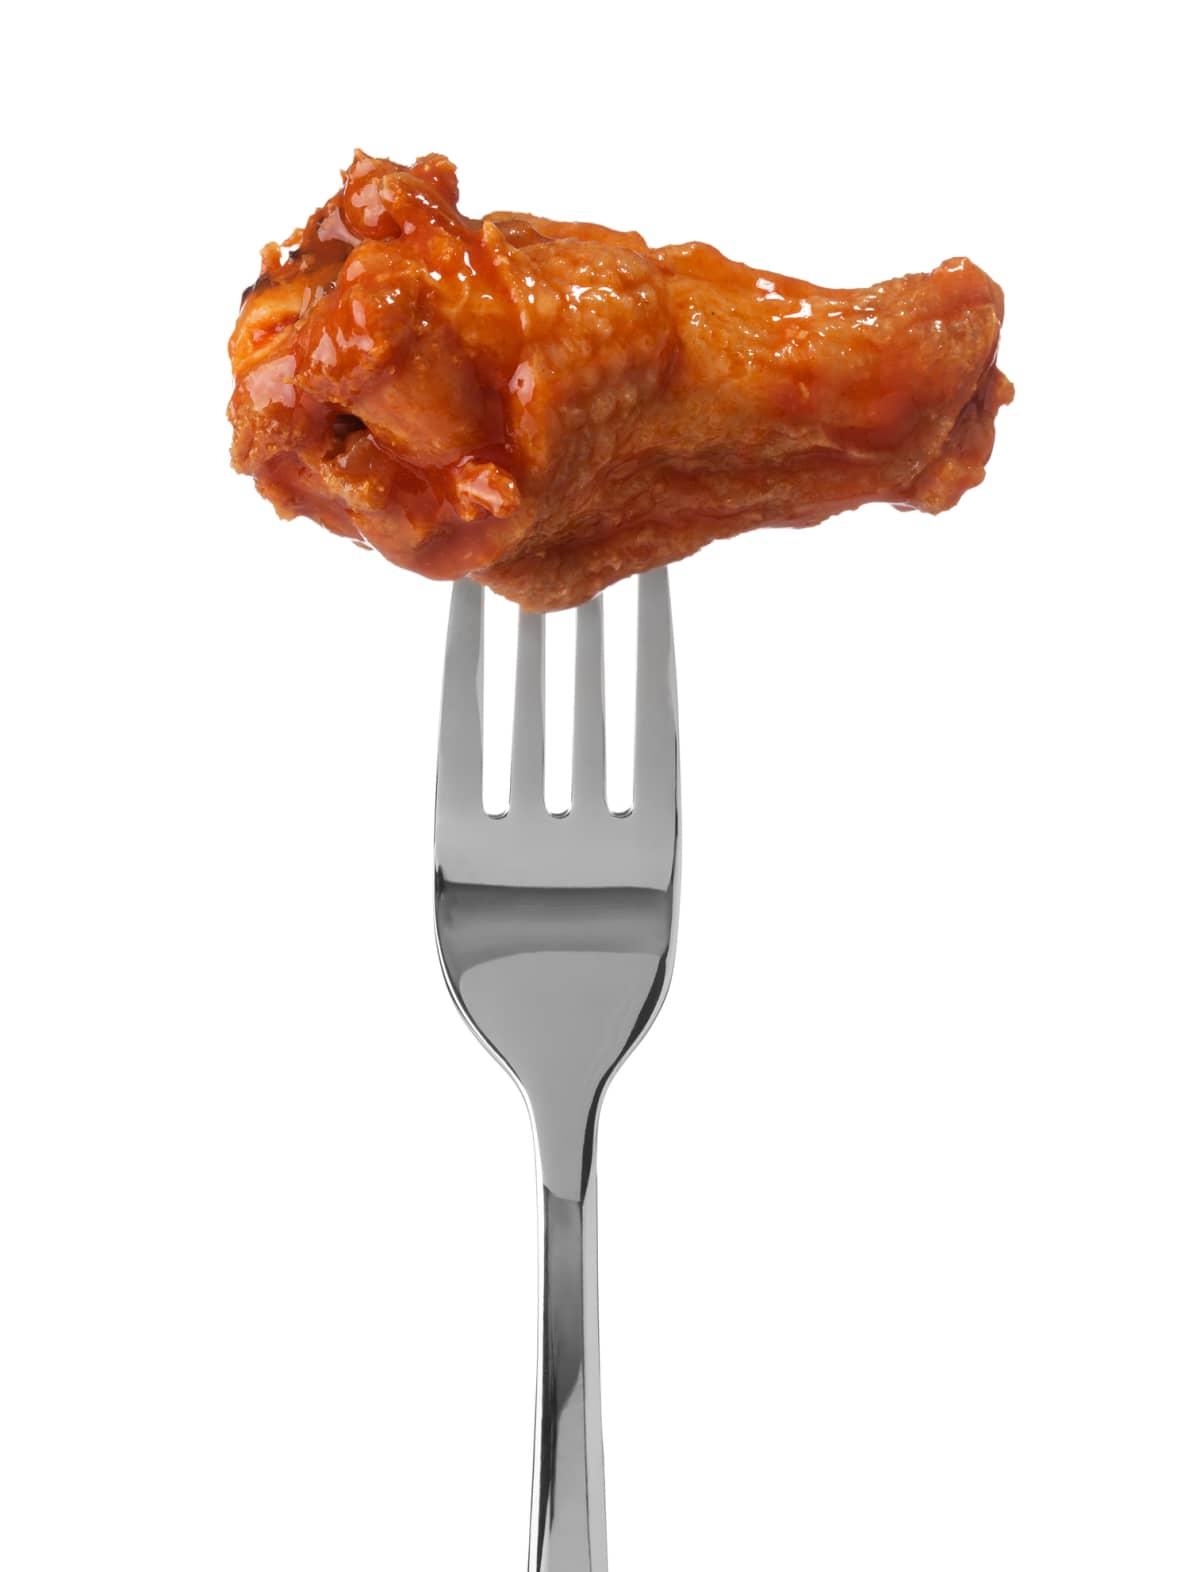 Hot wing drumstick on fork on white background.  Please see my portfolio for other food and drink images.